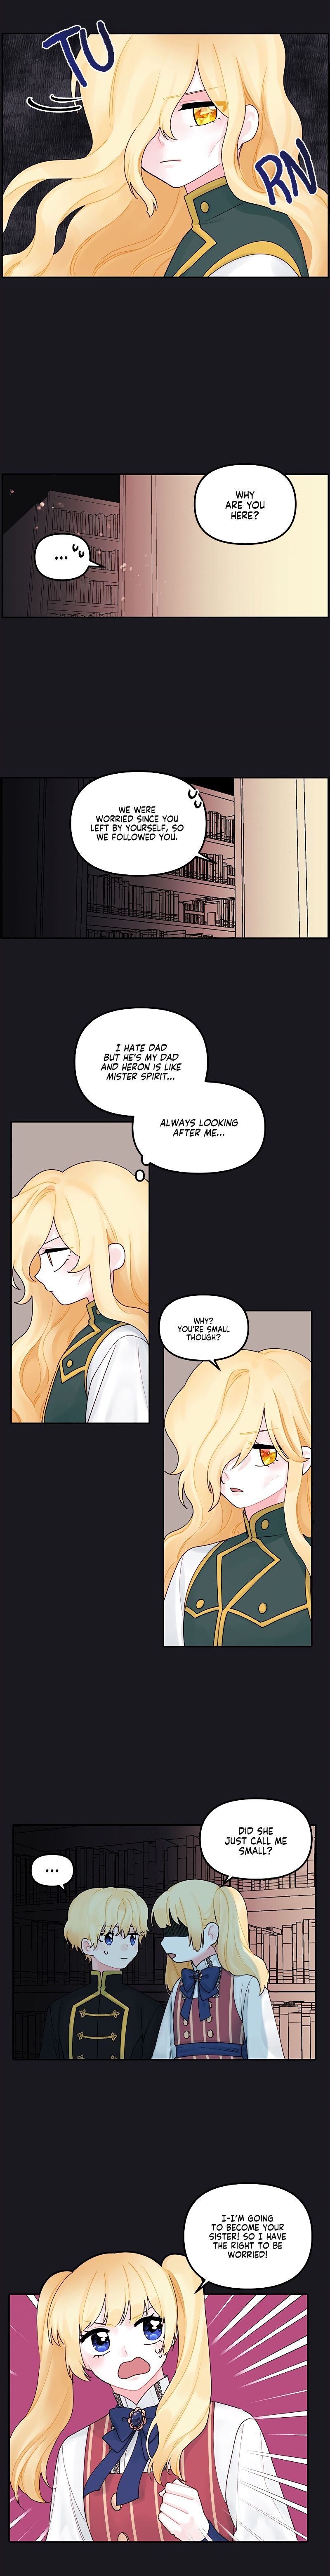 The Princess in the Dumpster Chapter 13 page 3